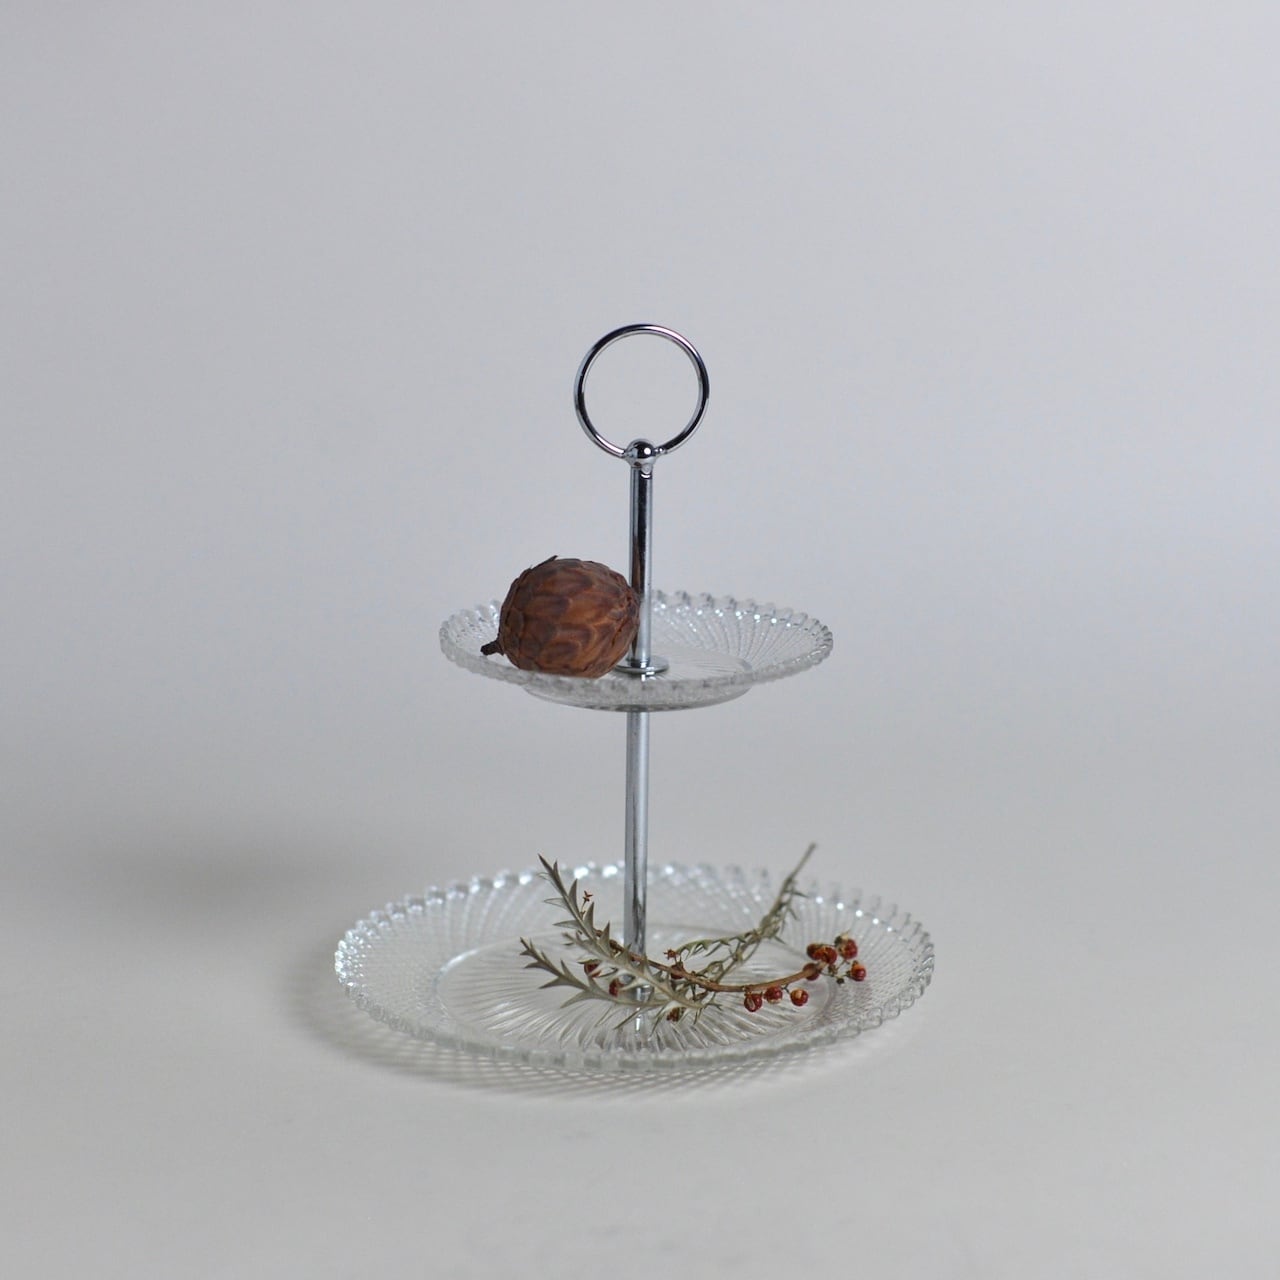 Cake Stand / ケーキスタンド【A】〈 コンポート / 焼き菓子 / 店舗什器 / 食器 / ディスプレイ〉112253 |  「TRILL」アンティーク家具と雑貨SHABBY'S MARKETPLACE の姉妹店 powered by BASE